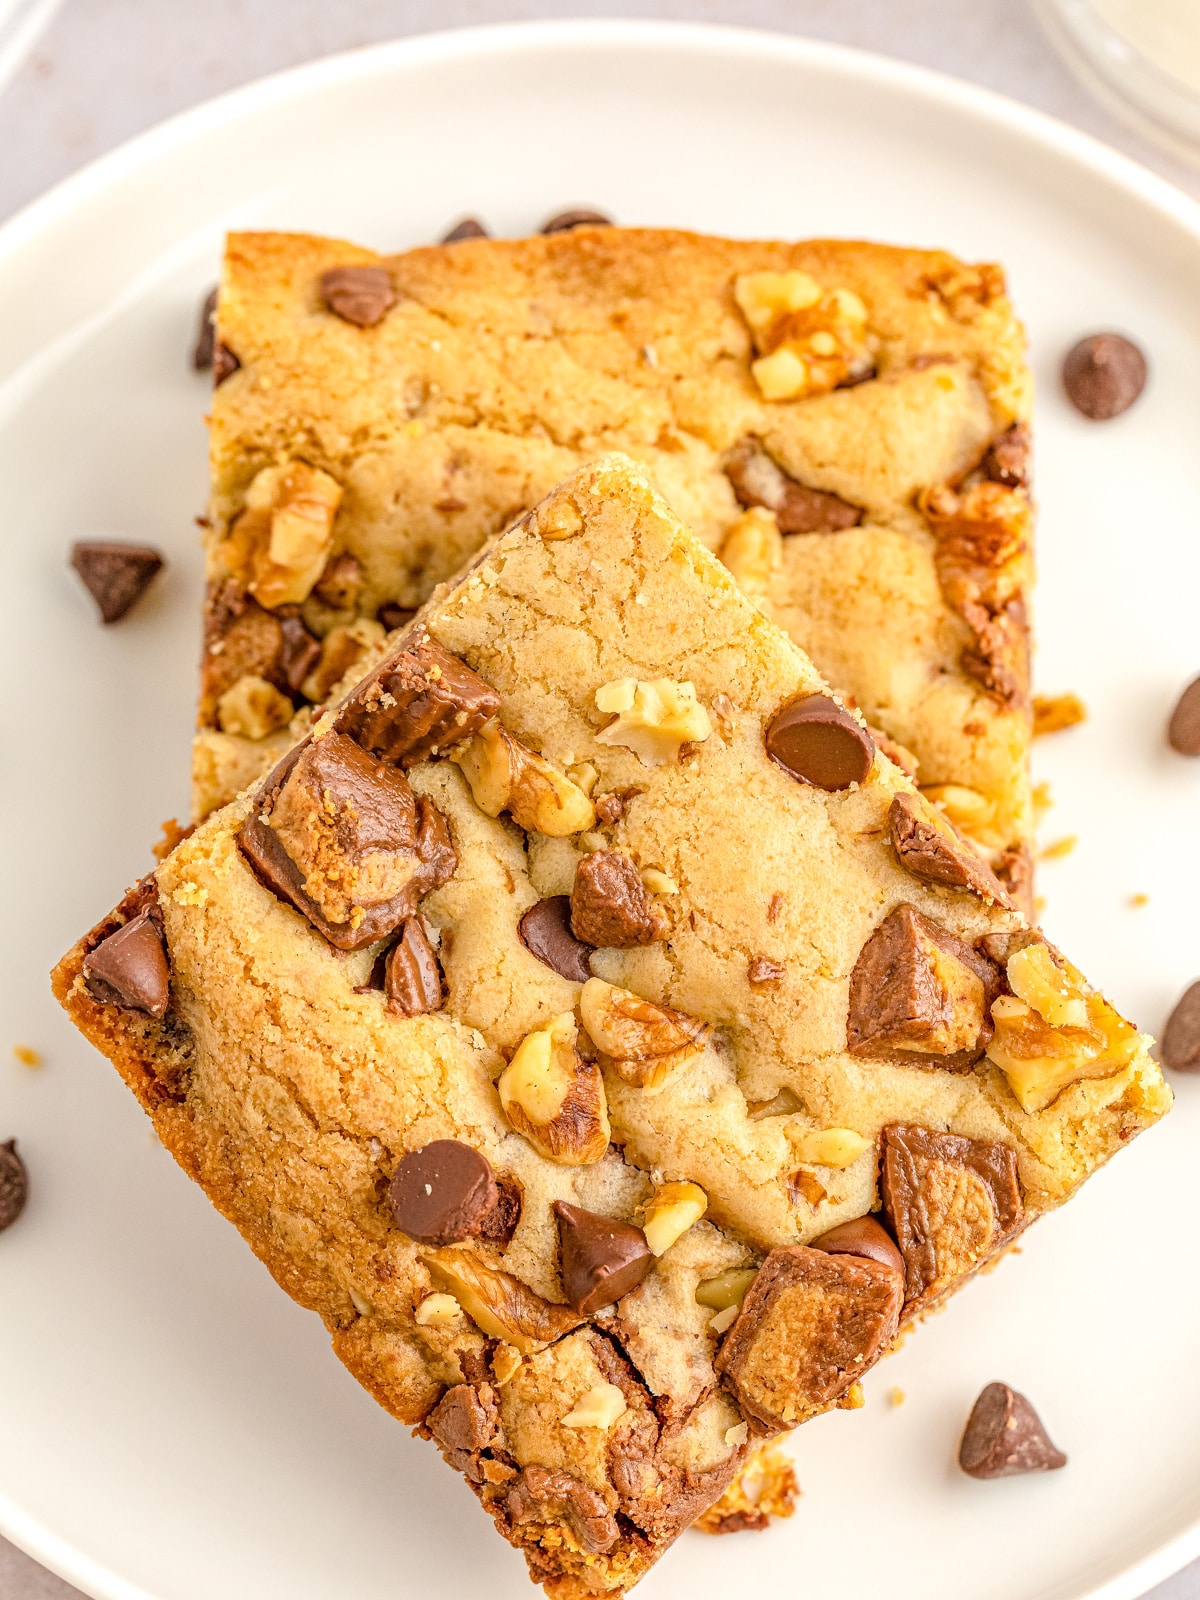 Two peanut butter cup and chocolate chip blondies with walnuts, stacked on a white plate.